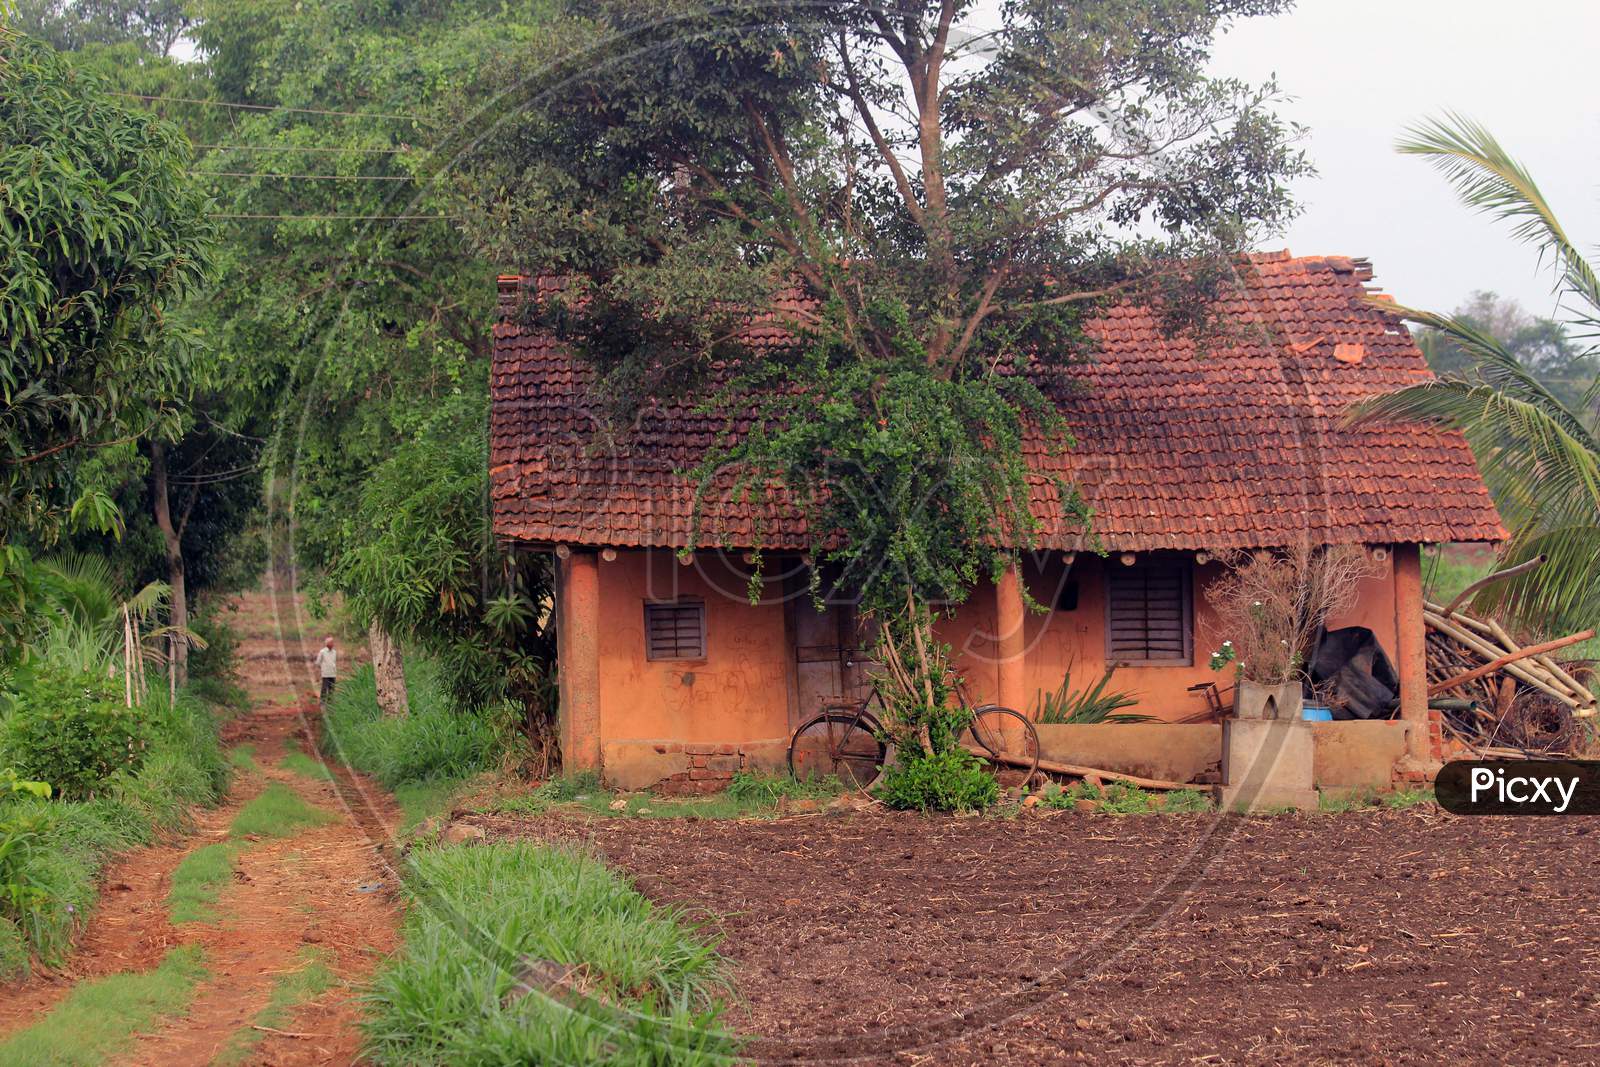 The house in the farm